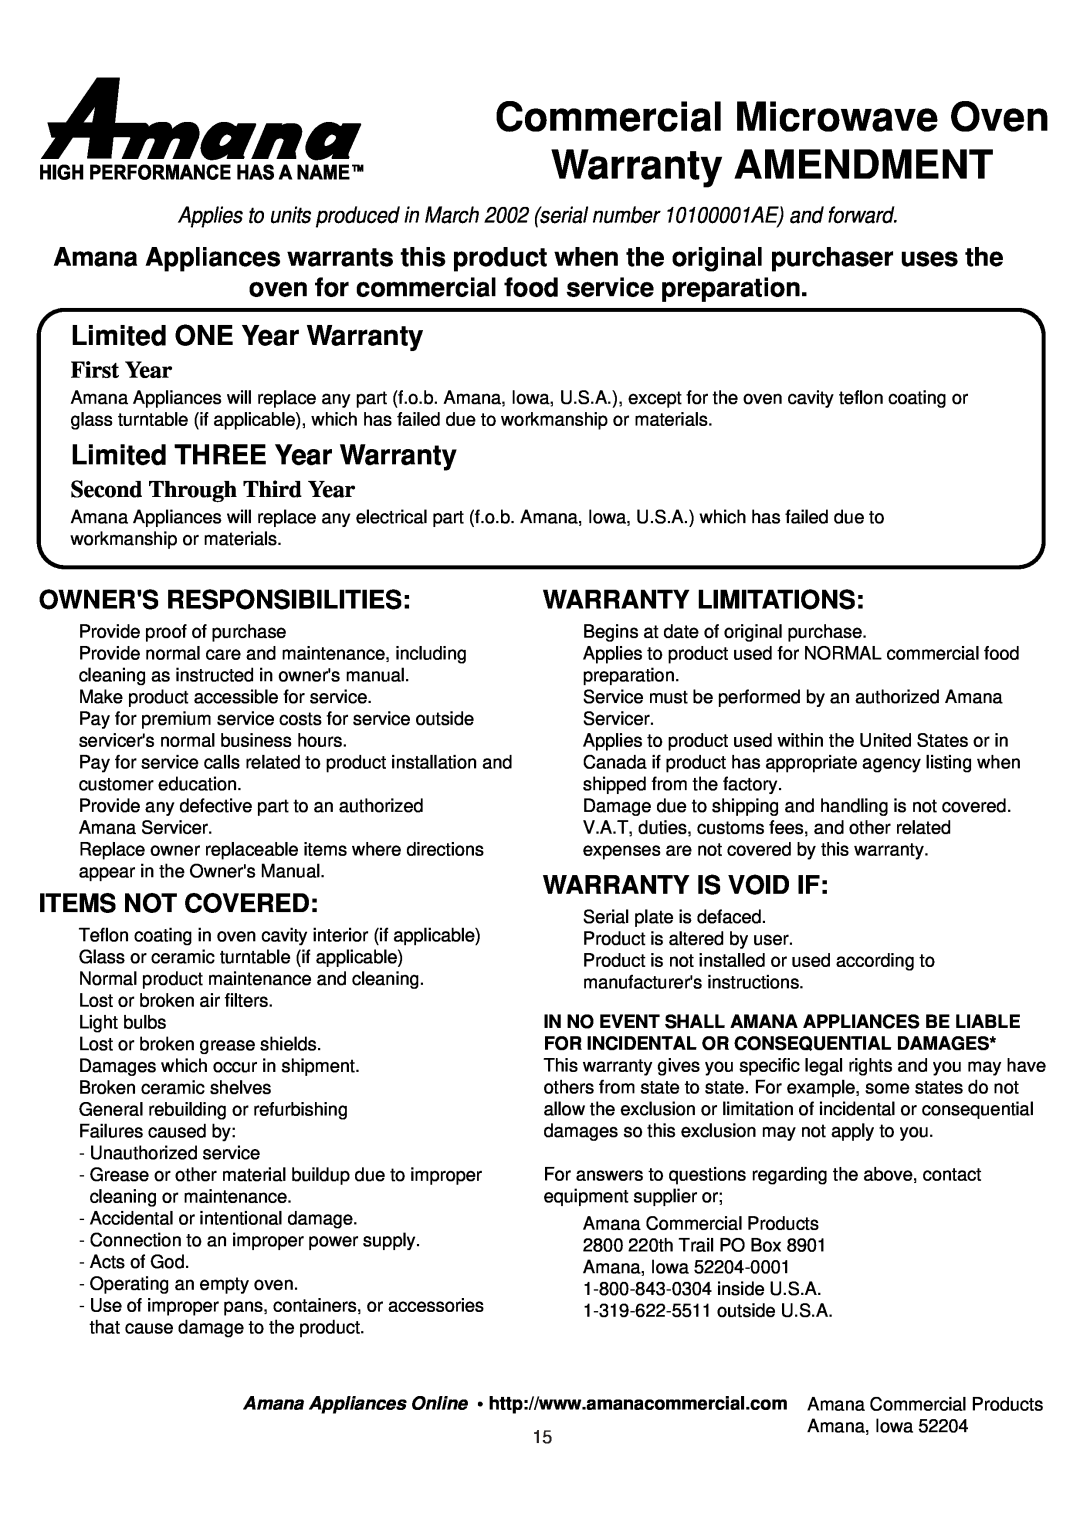 Amana LD10D2 Commercial Microwave Oven Warranty AMENDMENT, oven for commercial food service preparation, Items Not Covered 